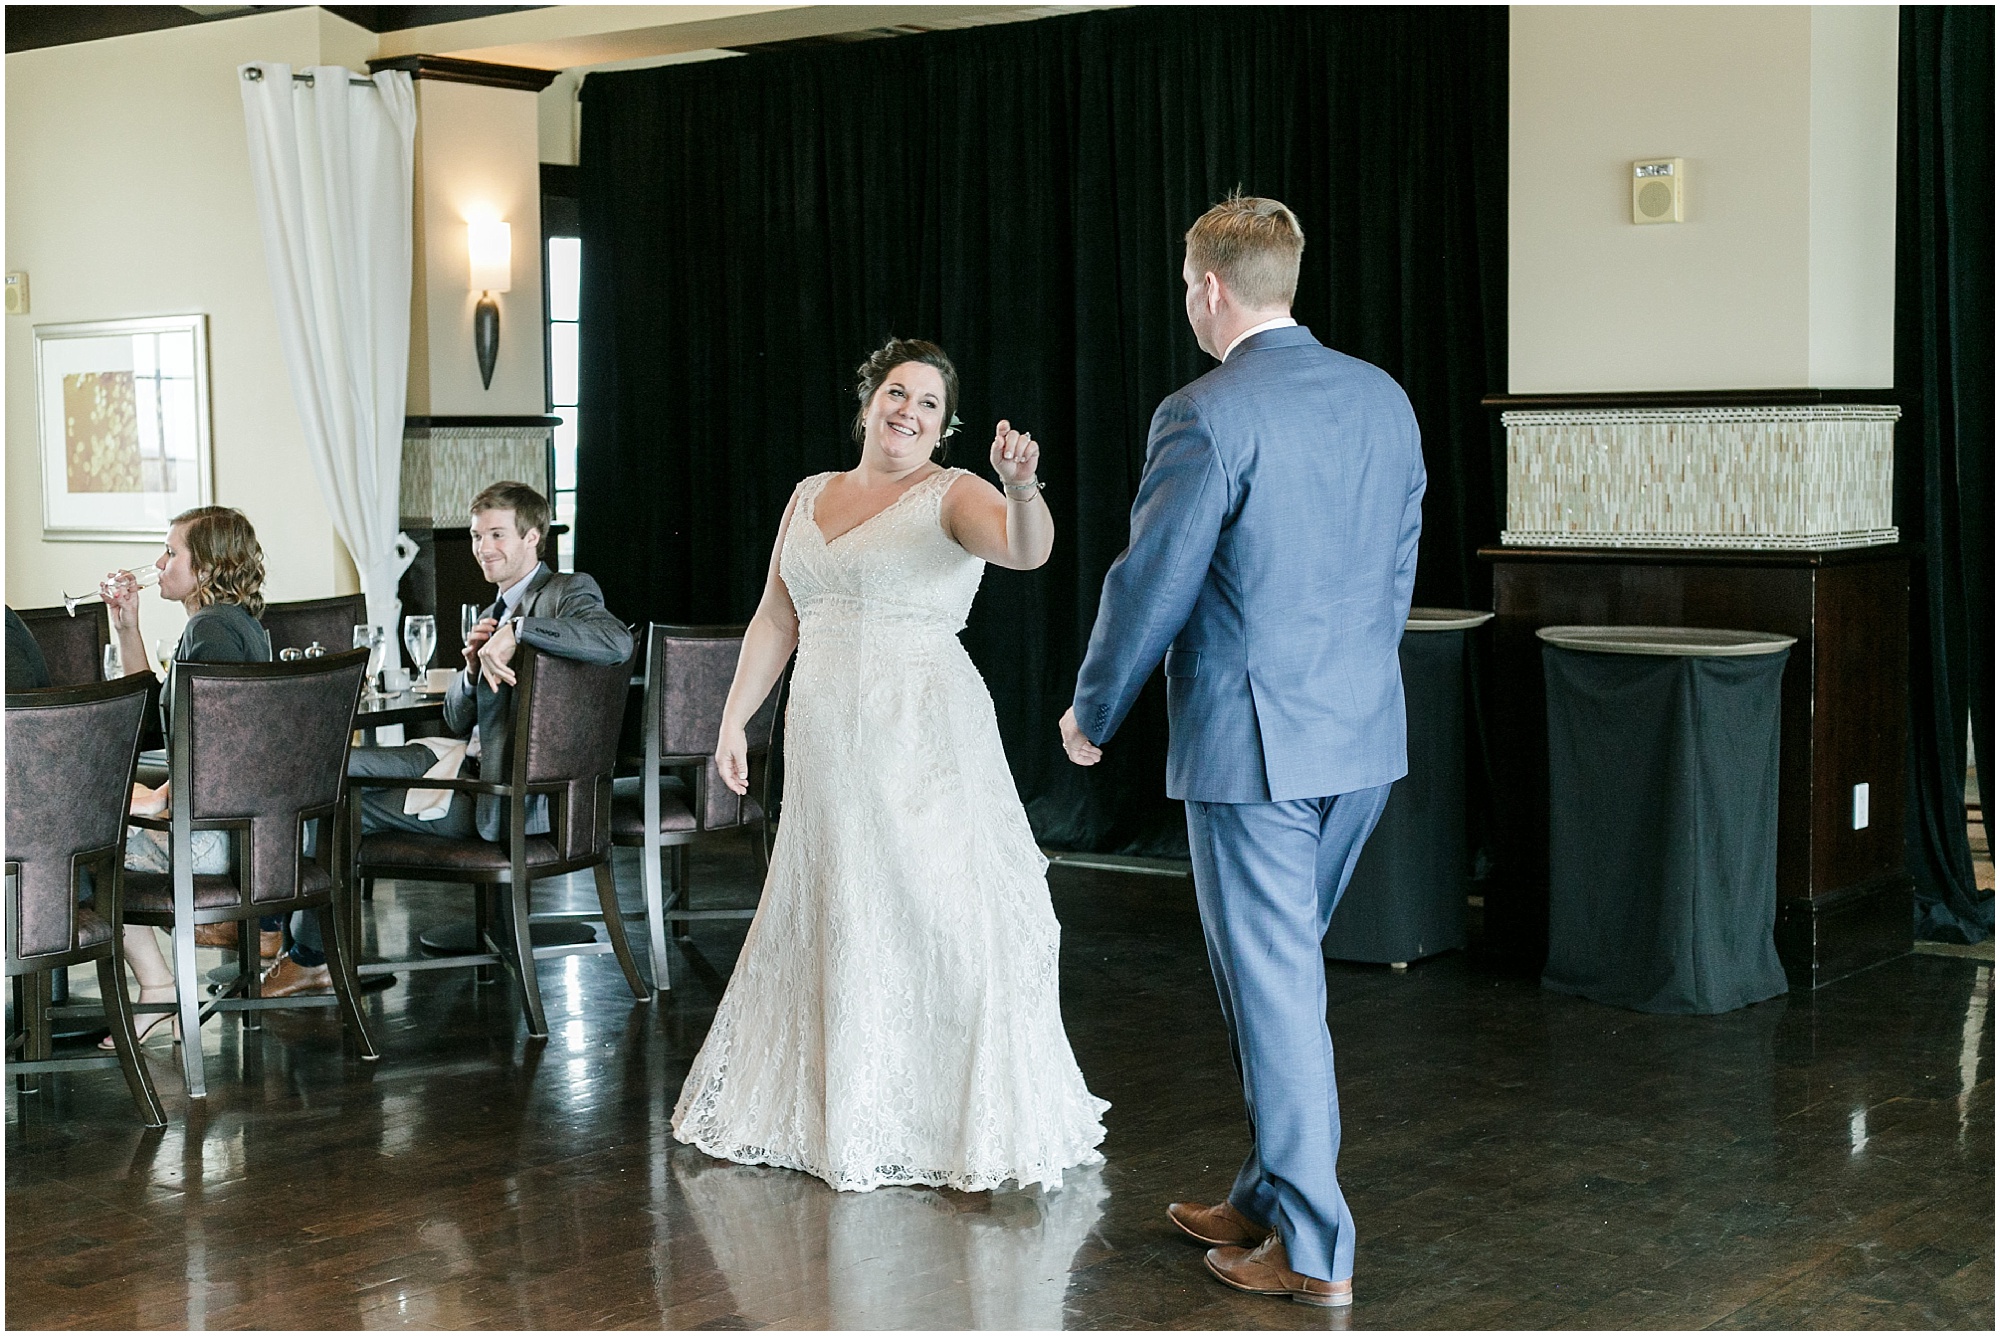 Bride jokes around with groom during their first dance. 